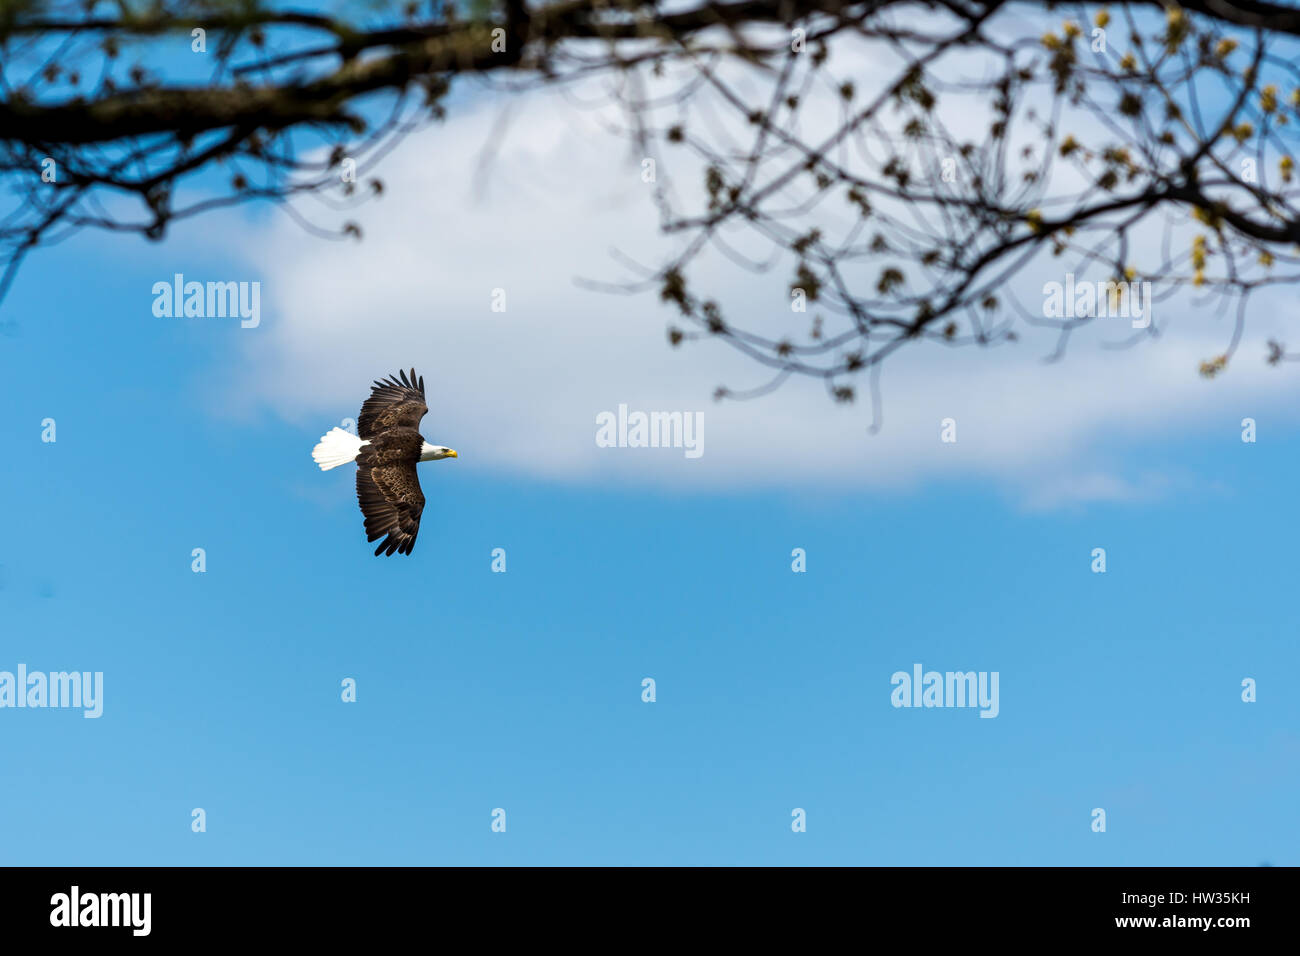 A bald eagle (Haliaeetus leucocephalus) soars against a cloudy sky, framed by tree branches. Stock Photo